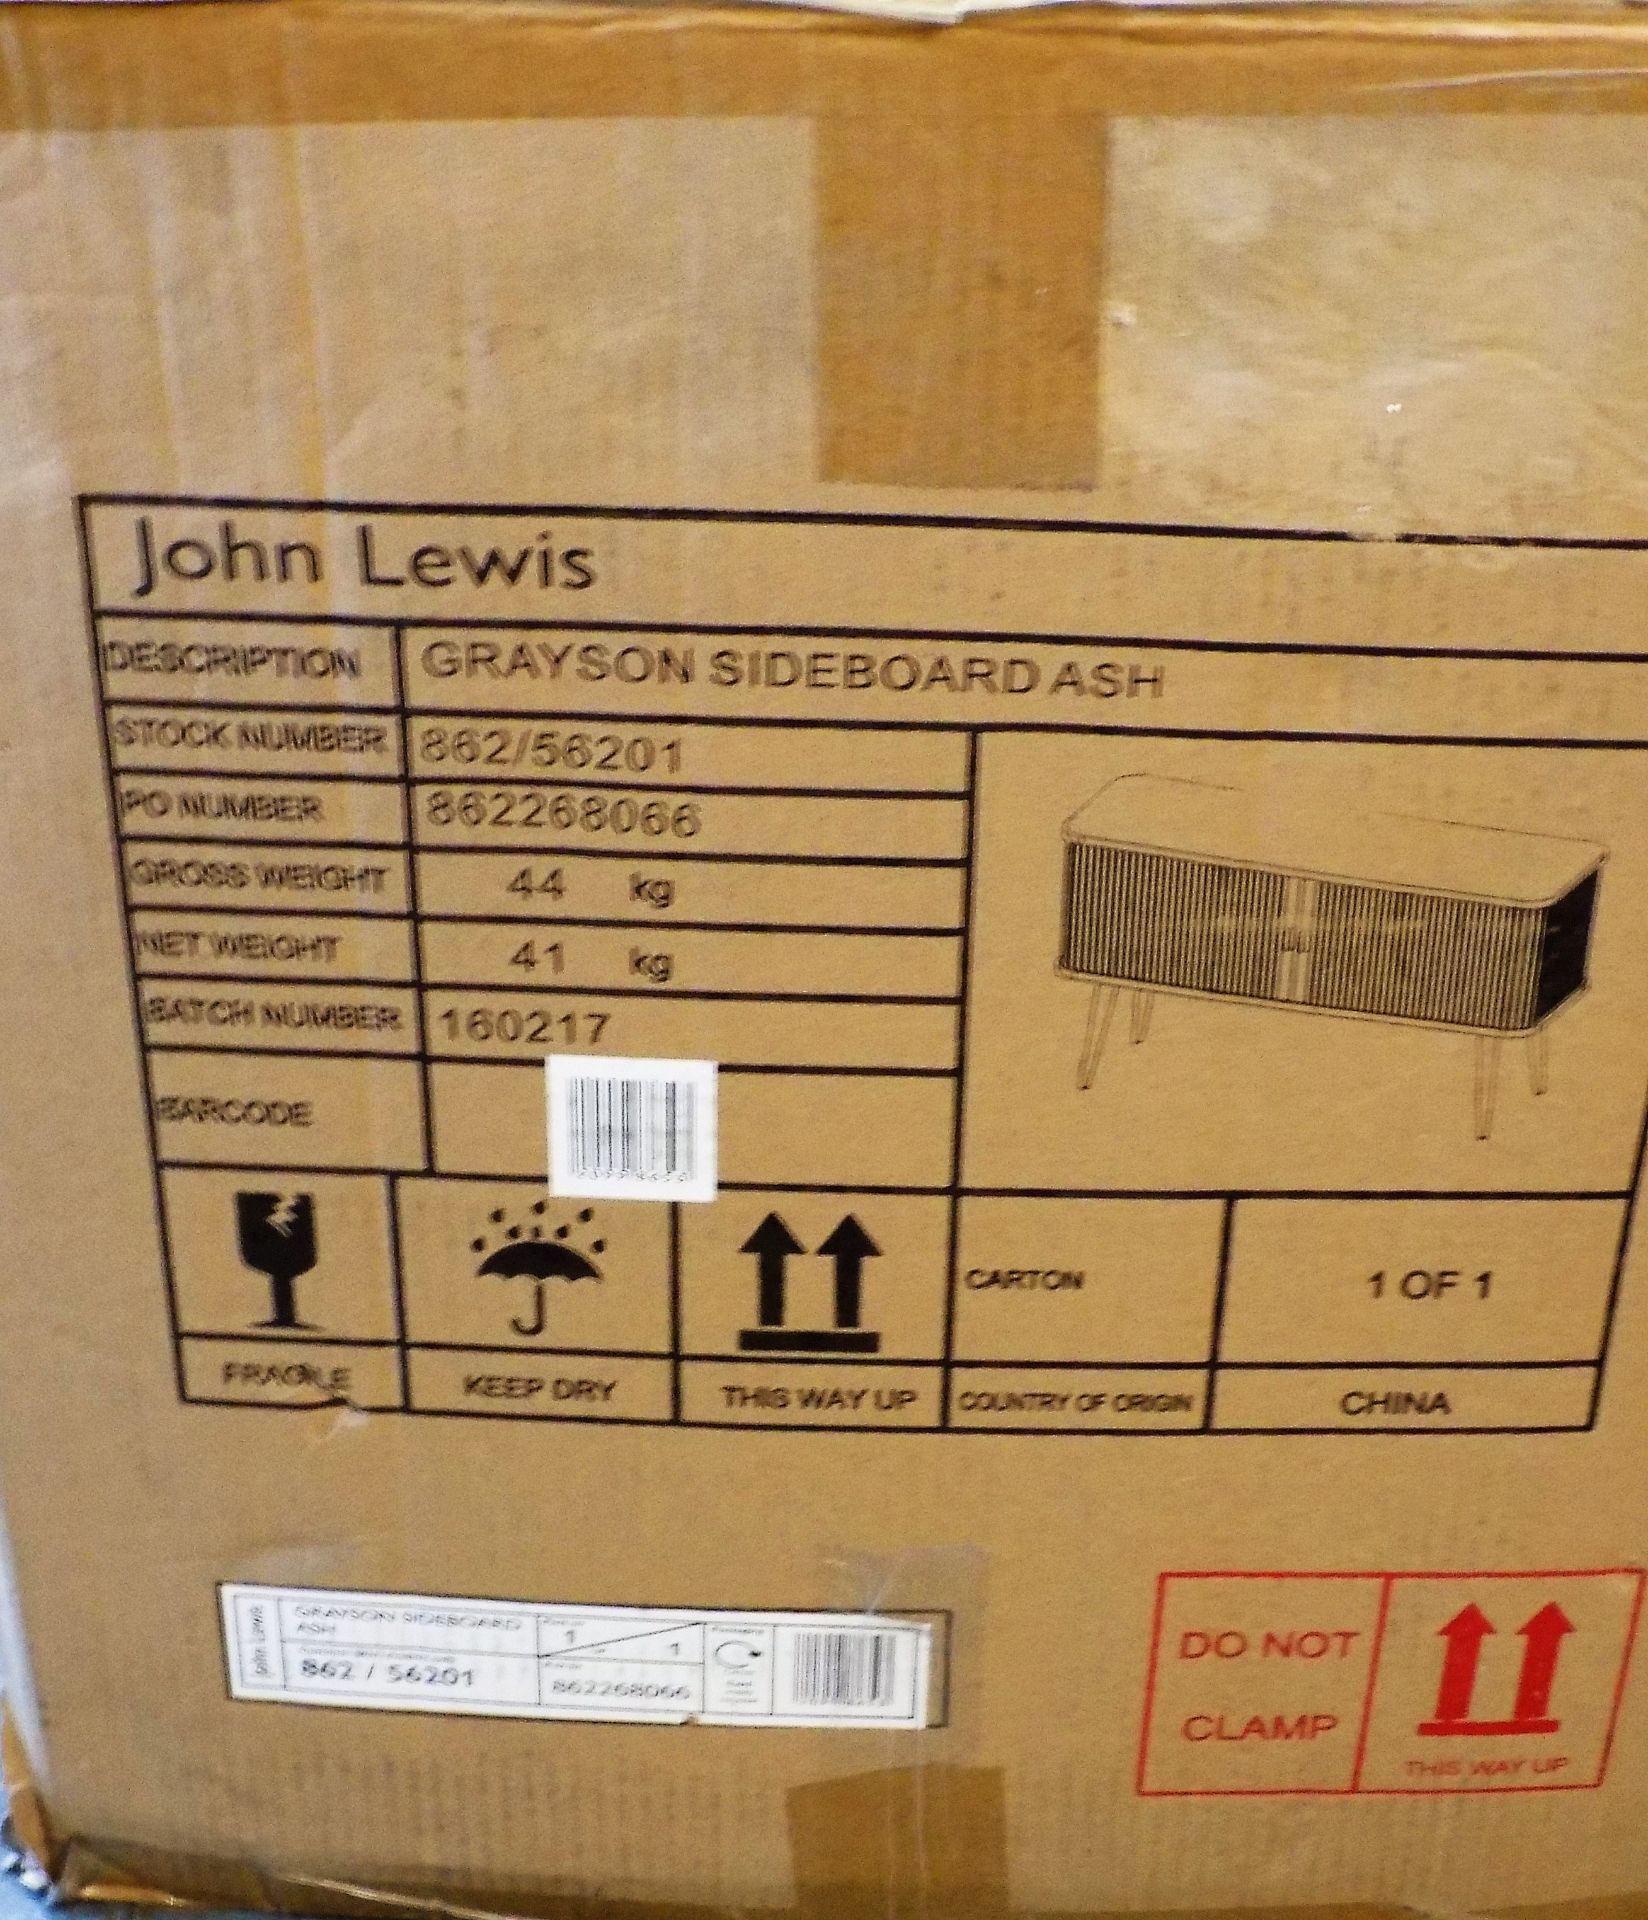 John Lewis "Grayson" Sideboard RRP £599. BRAND NEW SEALED - Image 2 of 3